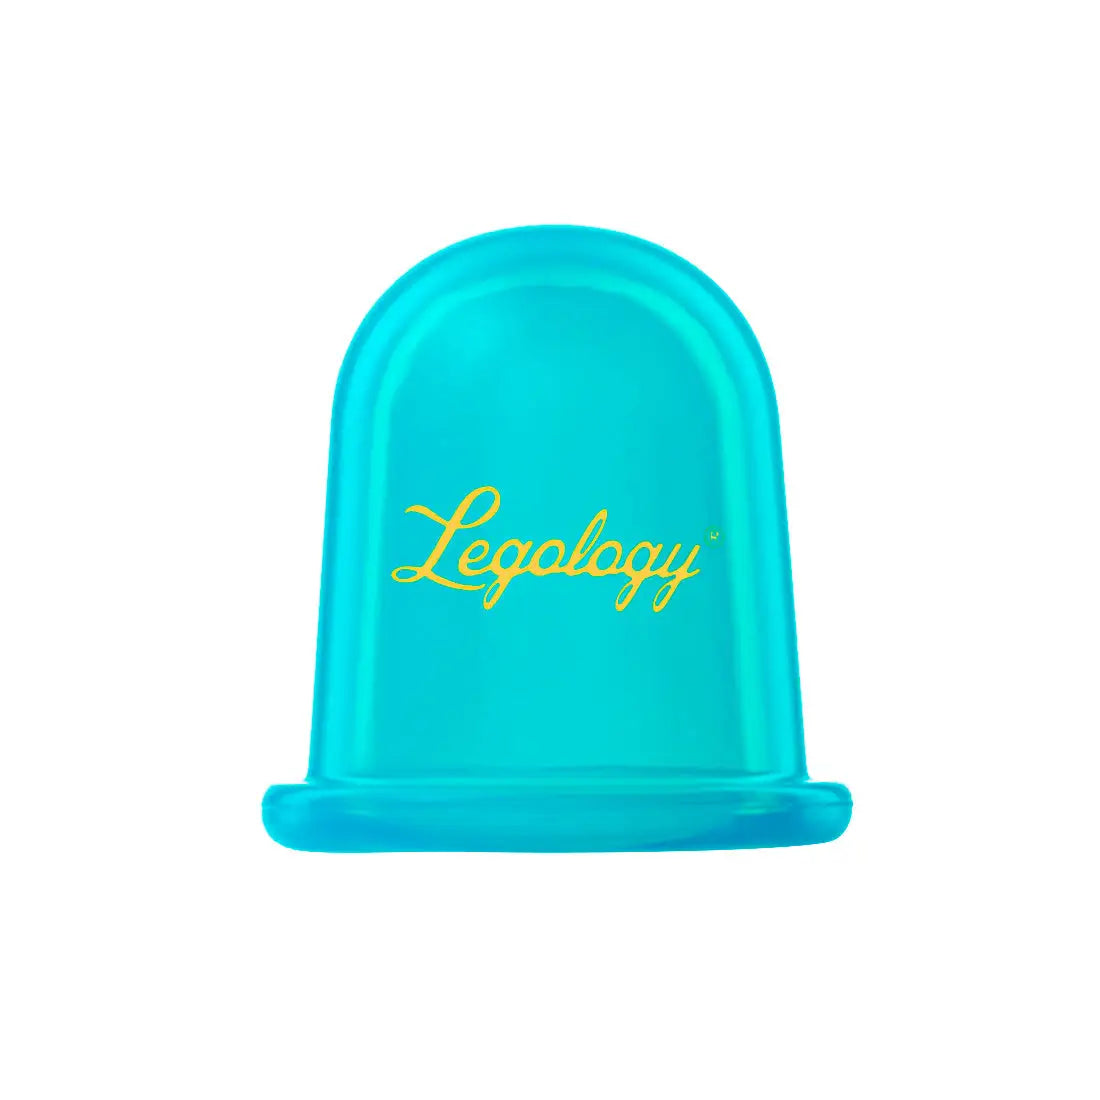 Legology Circu-Lite Squeeze Therapy For Legs - Free Shipping